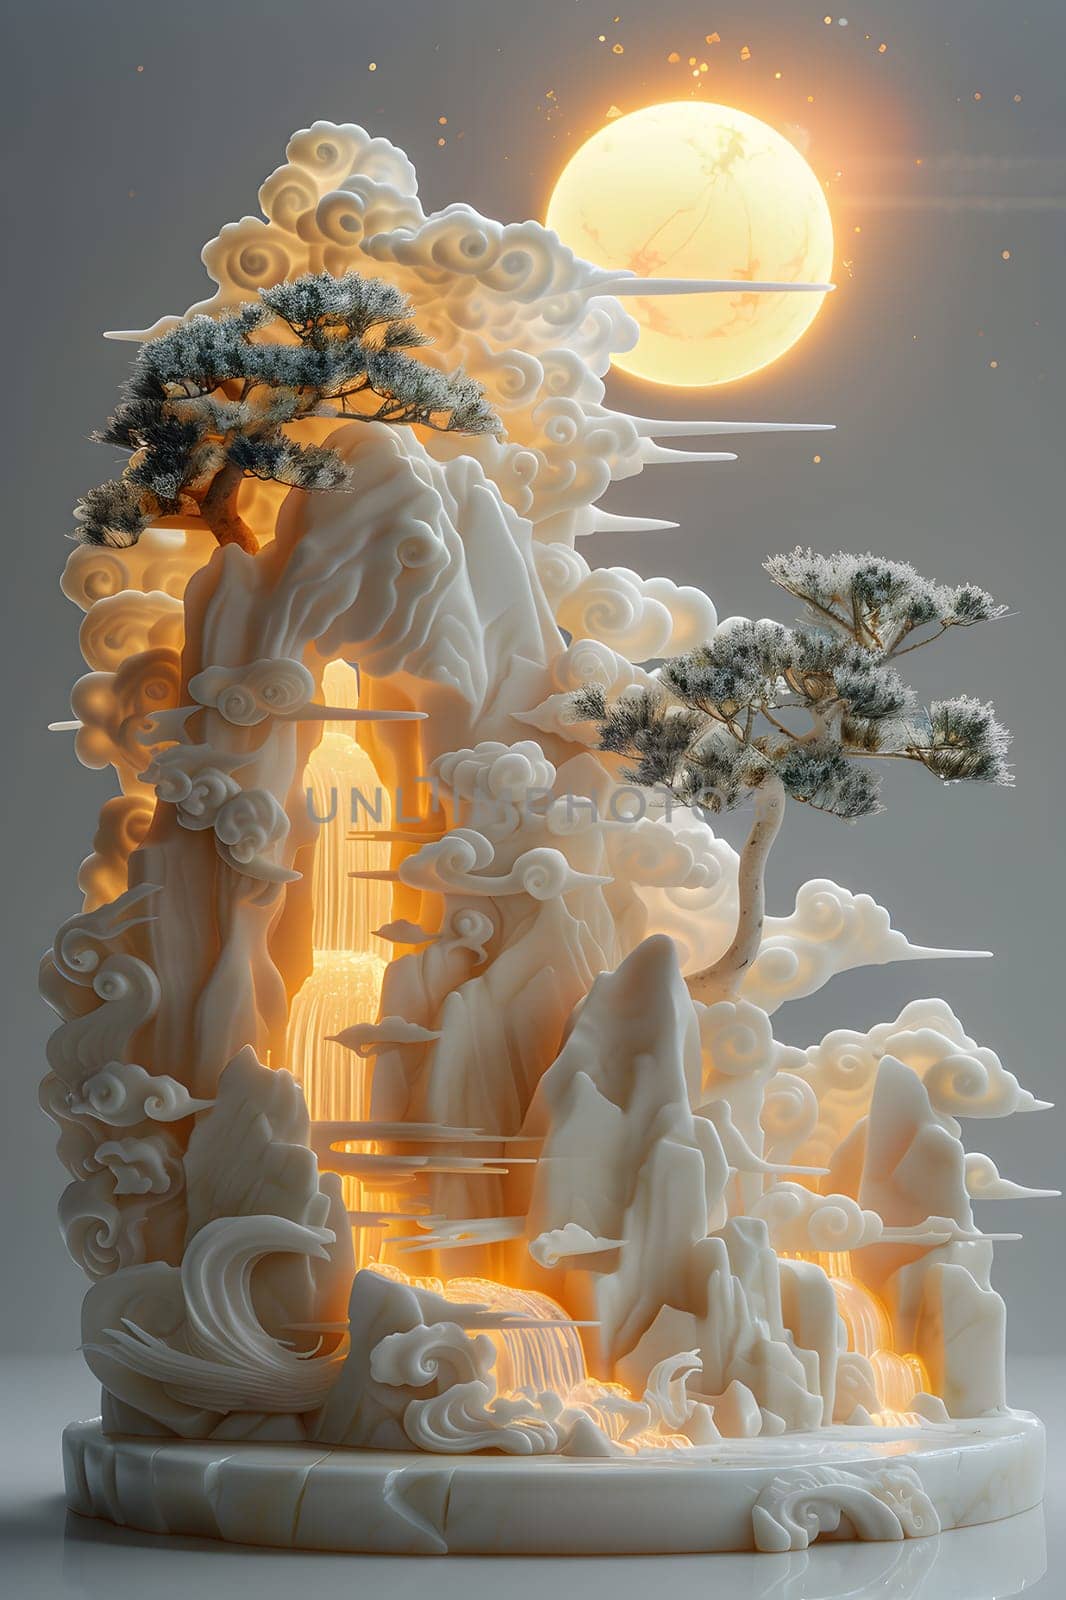 A breathtaking sculpture of a mountain with a tree under a full moon in the sky, depicting the beauty of nature and art through wood and flame